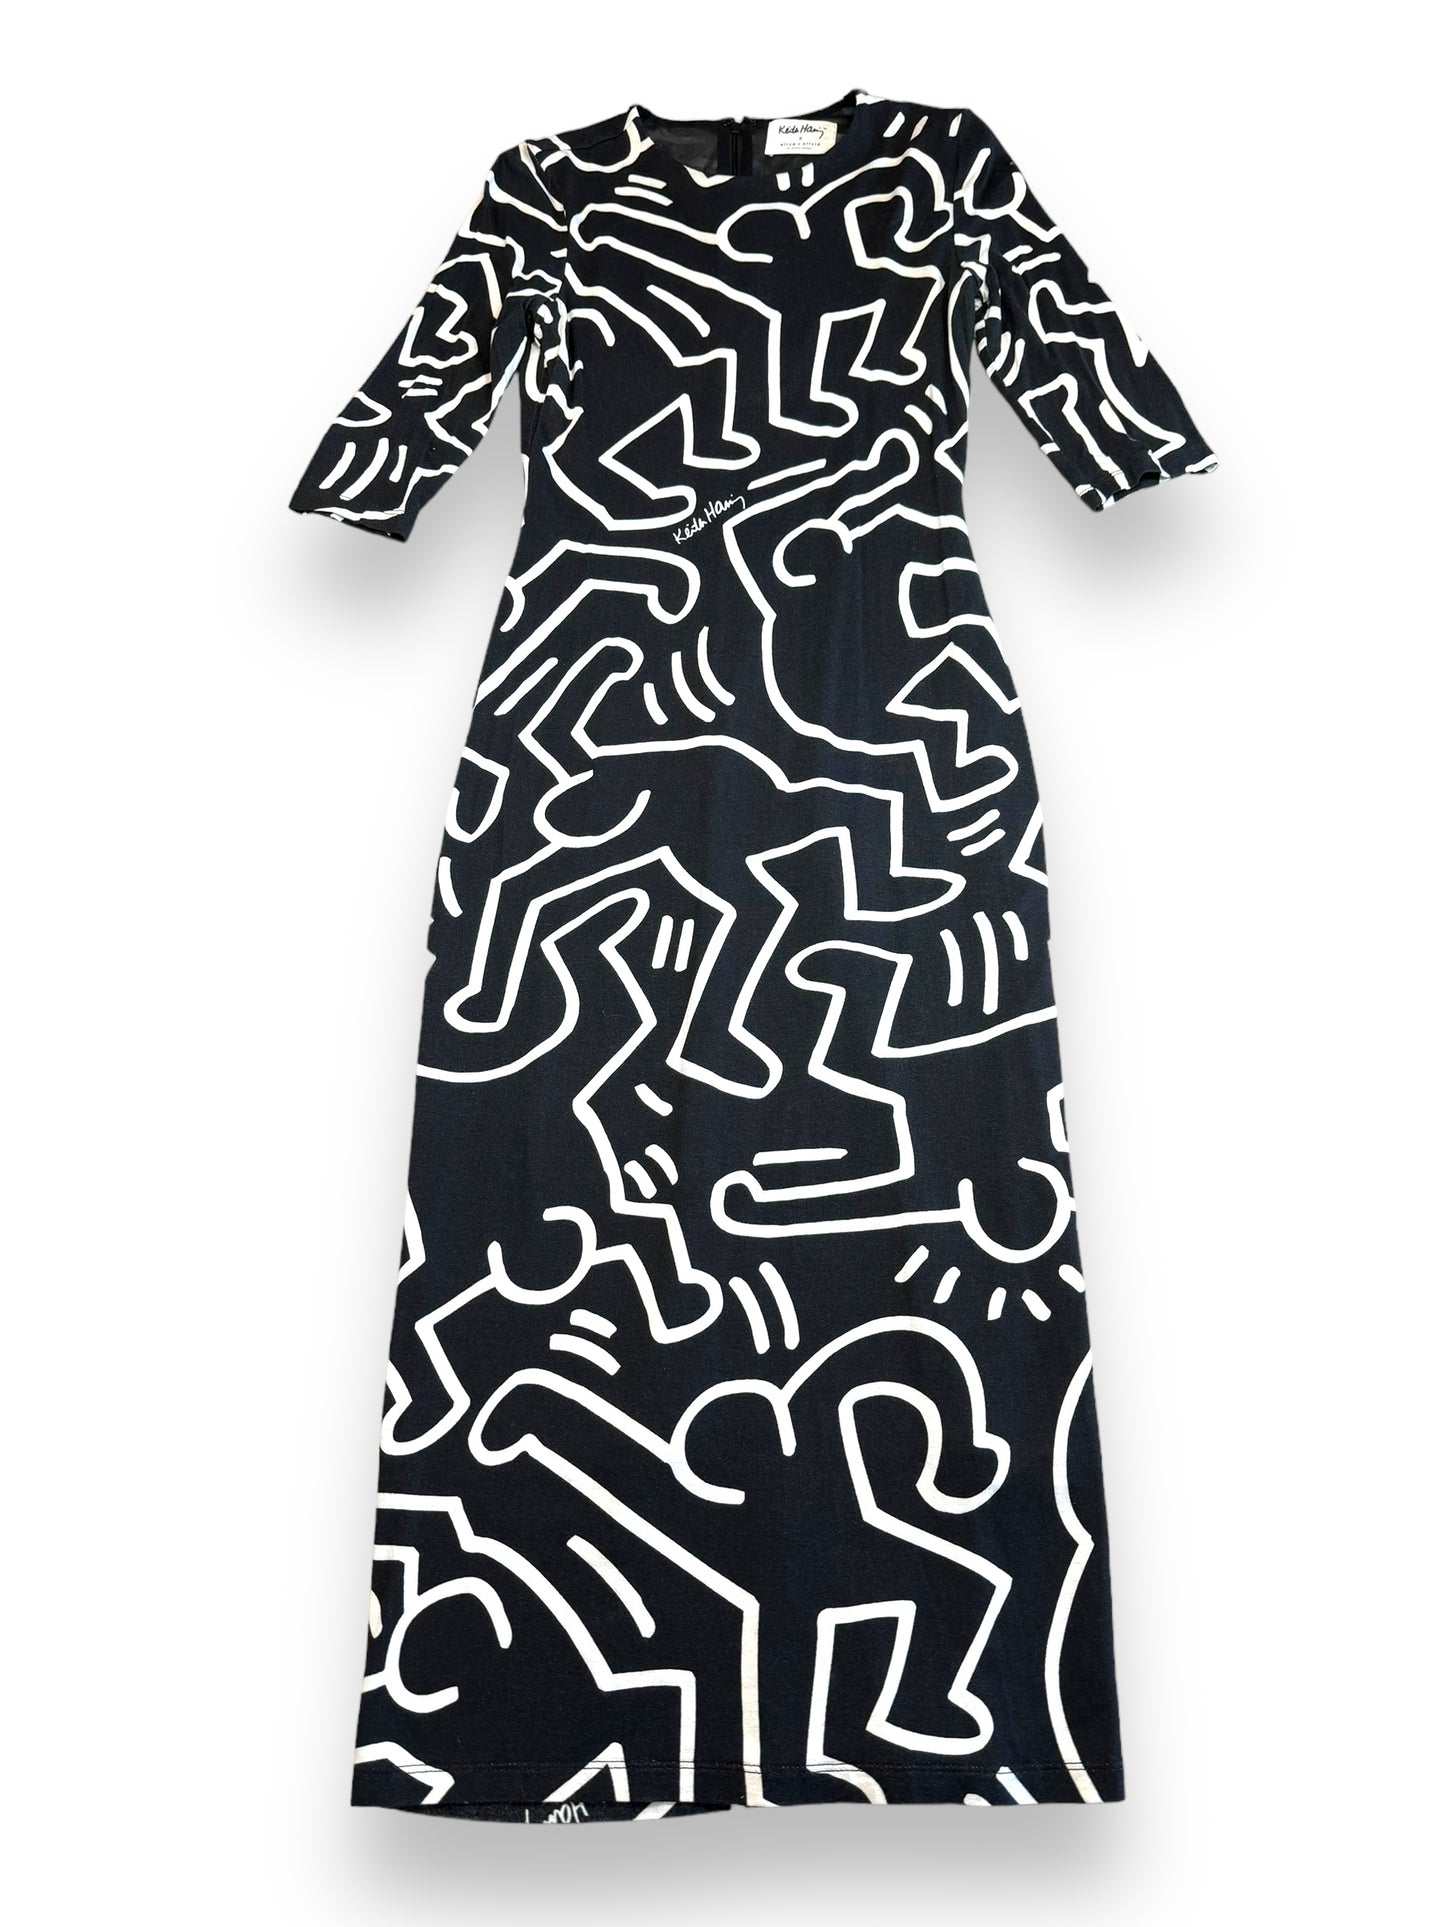 Trend: Alice + Olivia Black and White Keith Haring Body con Dress